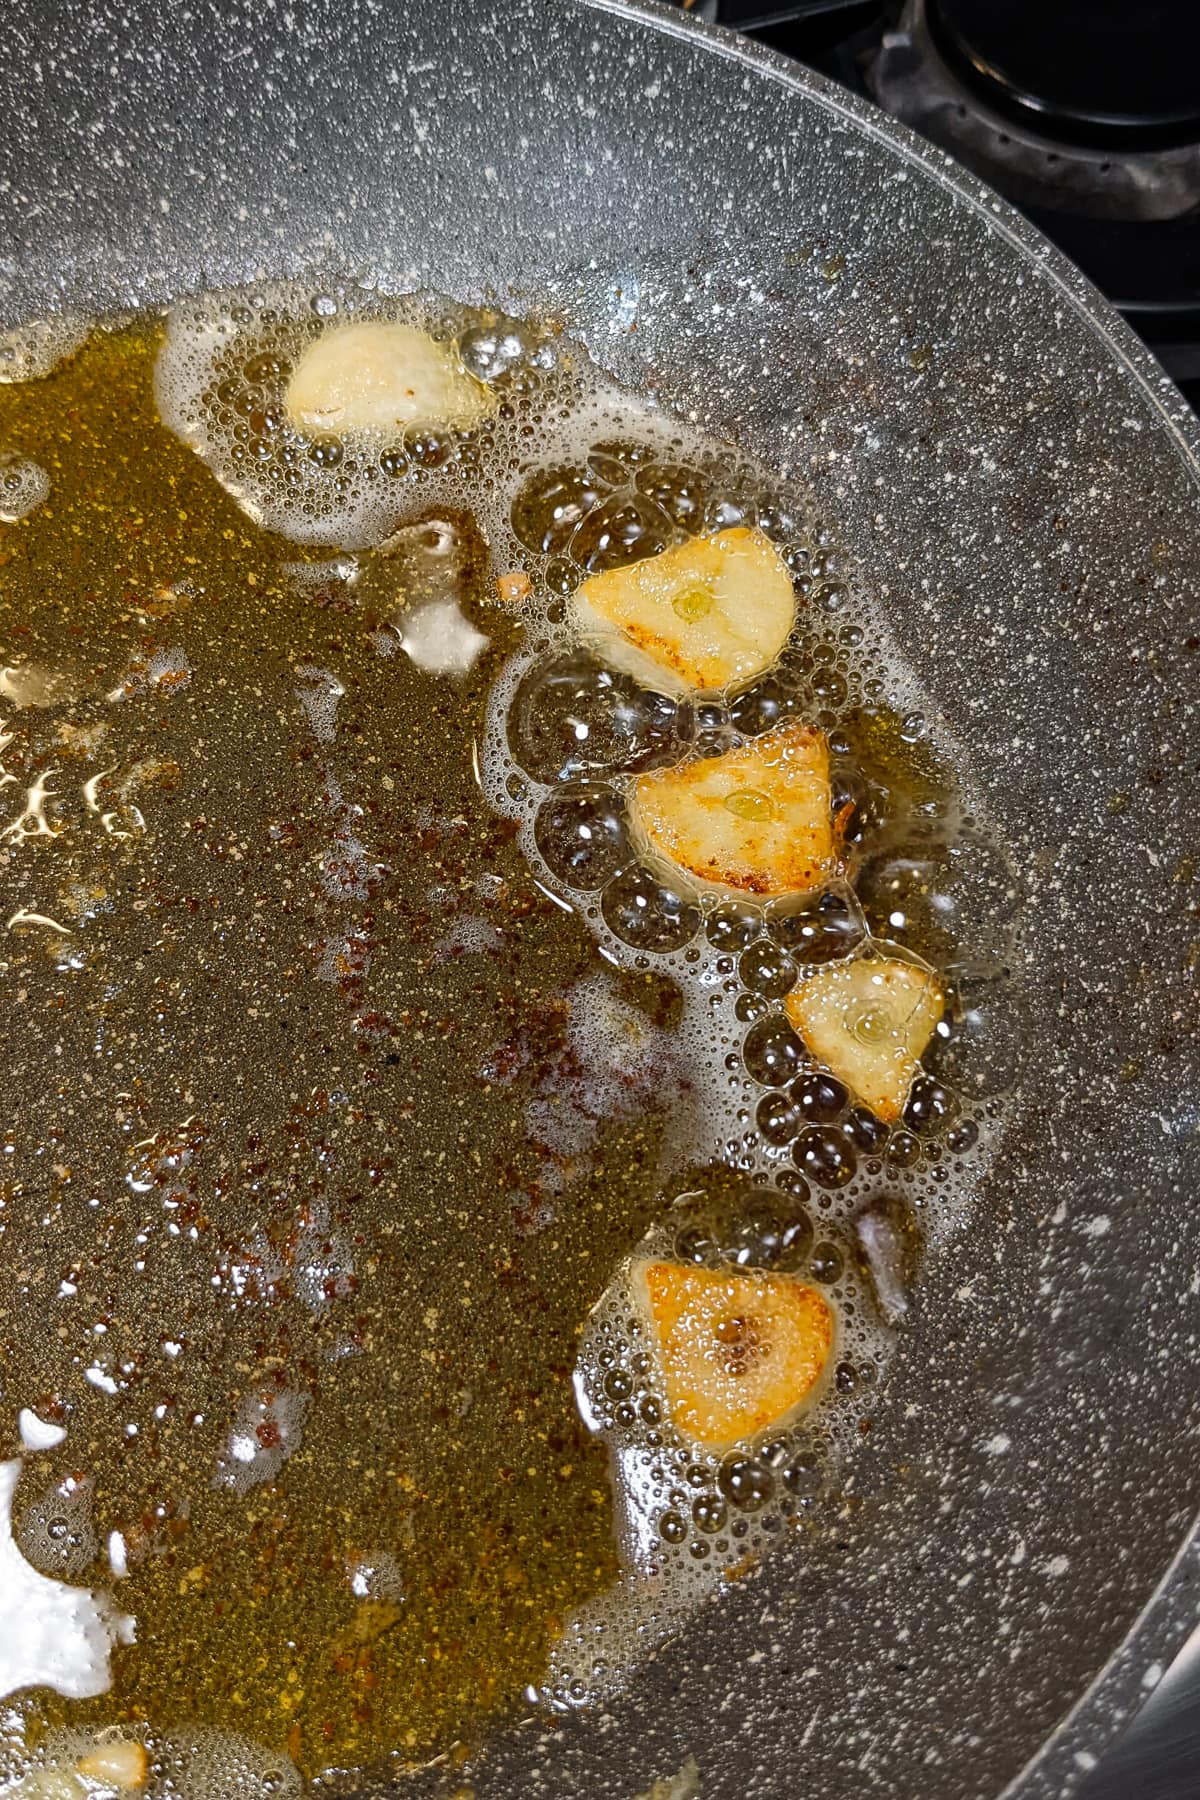 Fried garlic slices in melted butter in a sauce pan.